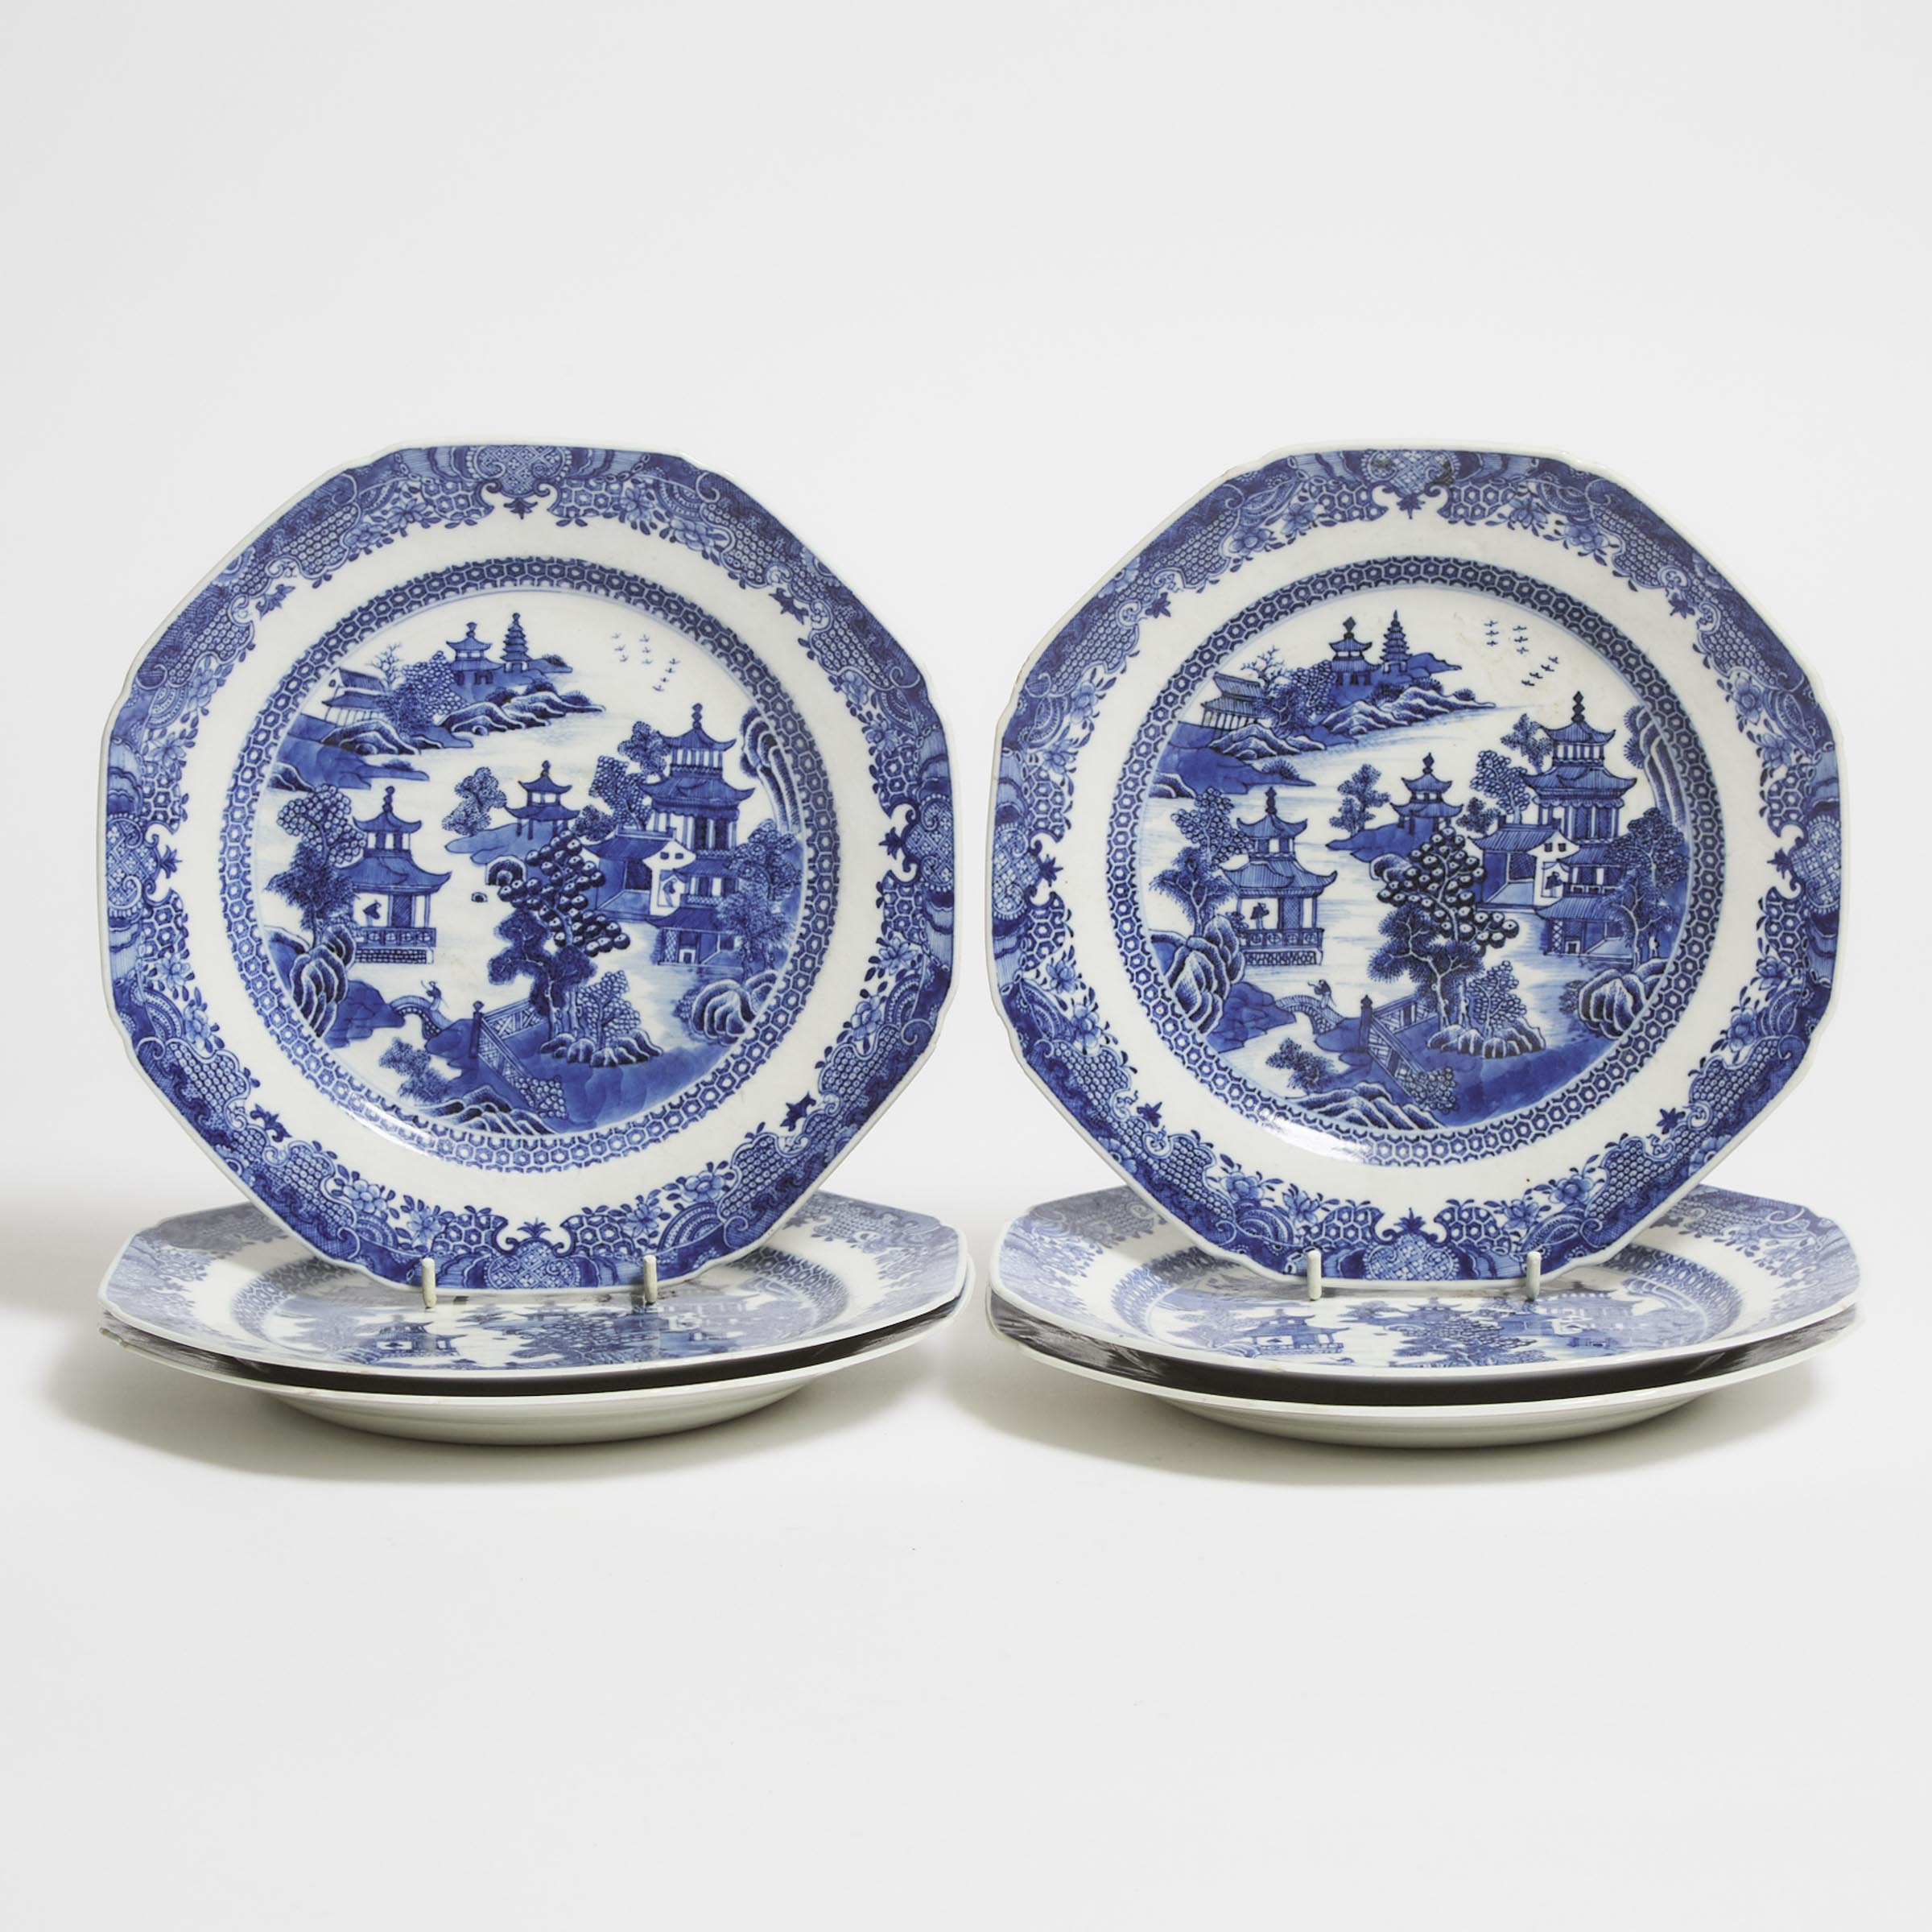 A Set of Six Chinese Export Blue and White Dishes, Qianlong Period, 18th Century